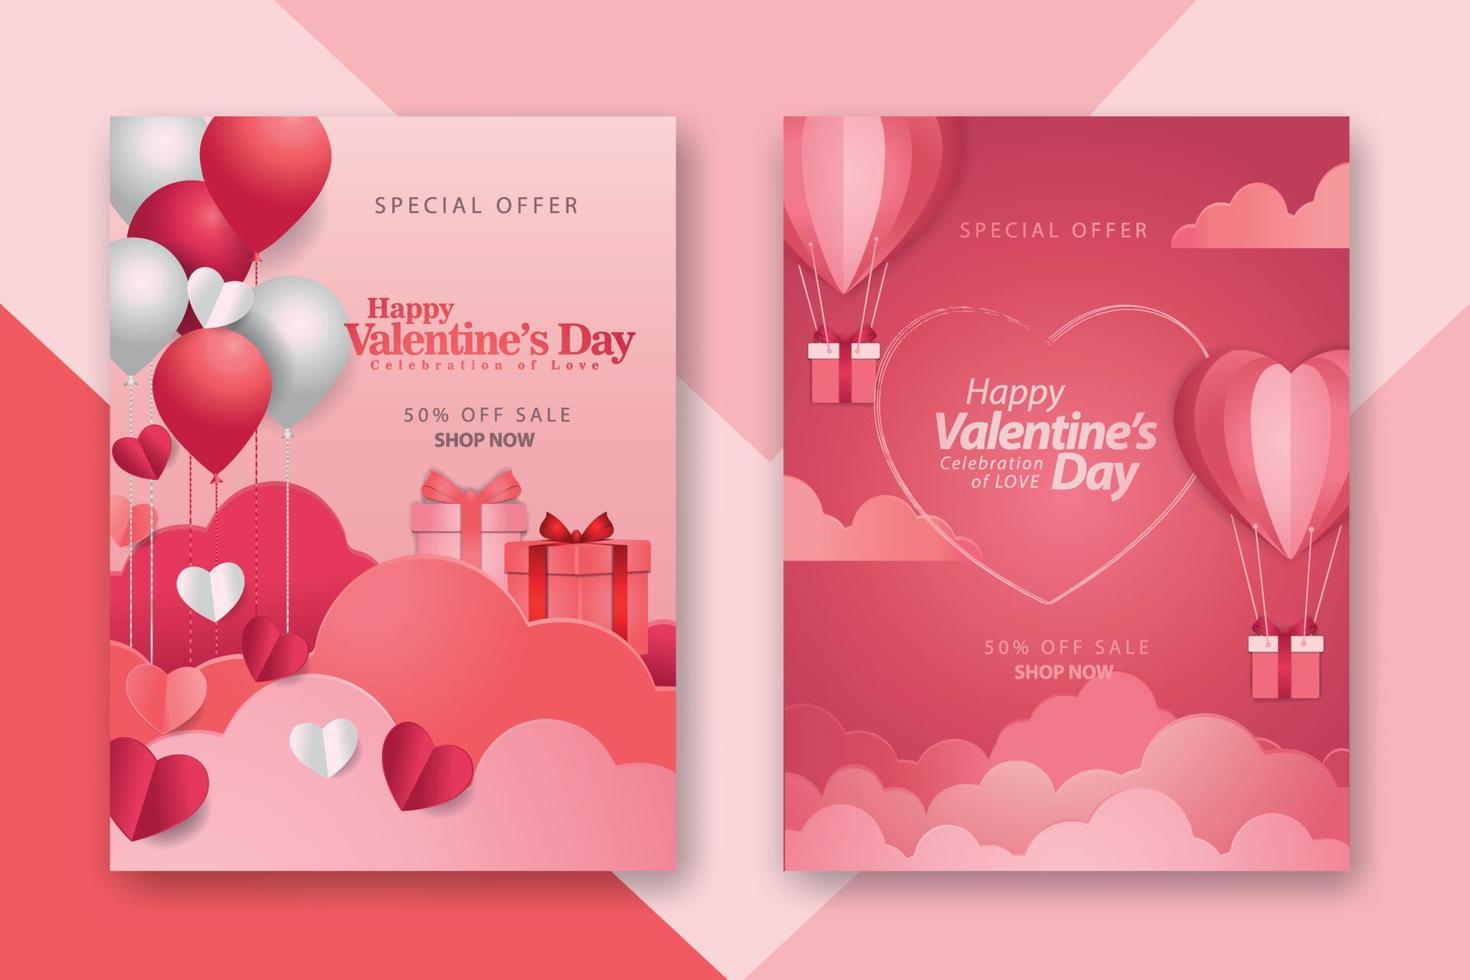 Valentine's day concept posters set with red 3d and pink paper hearts and frame on geometric background. Cute love sale banners or greeting cards vector